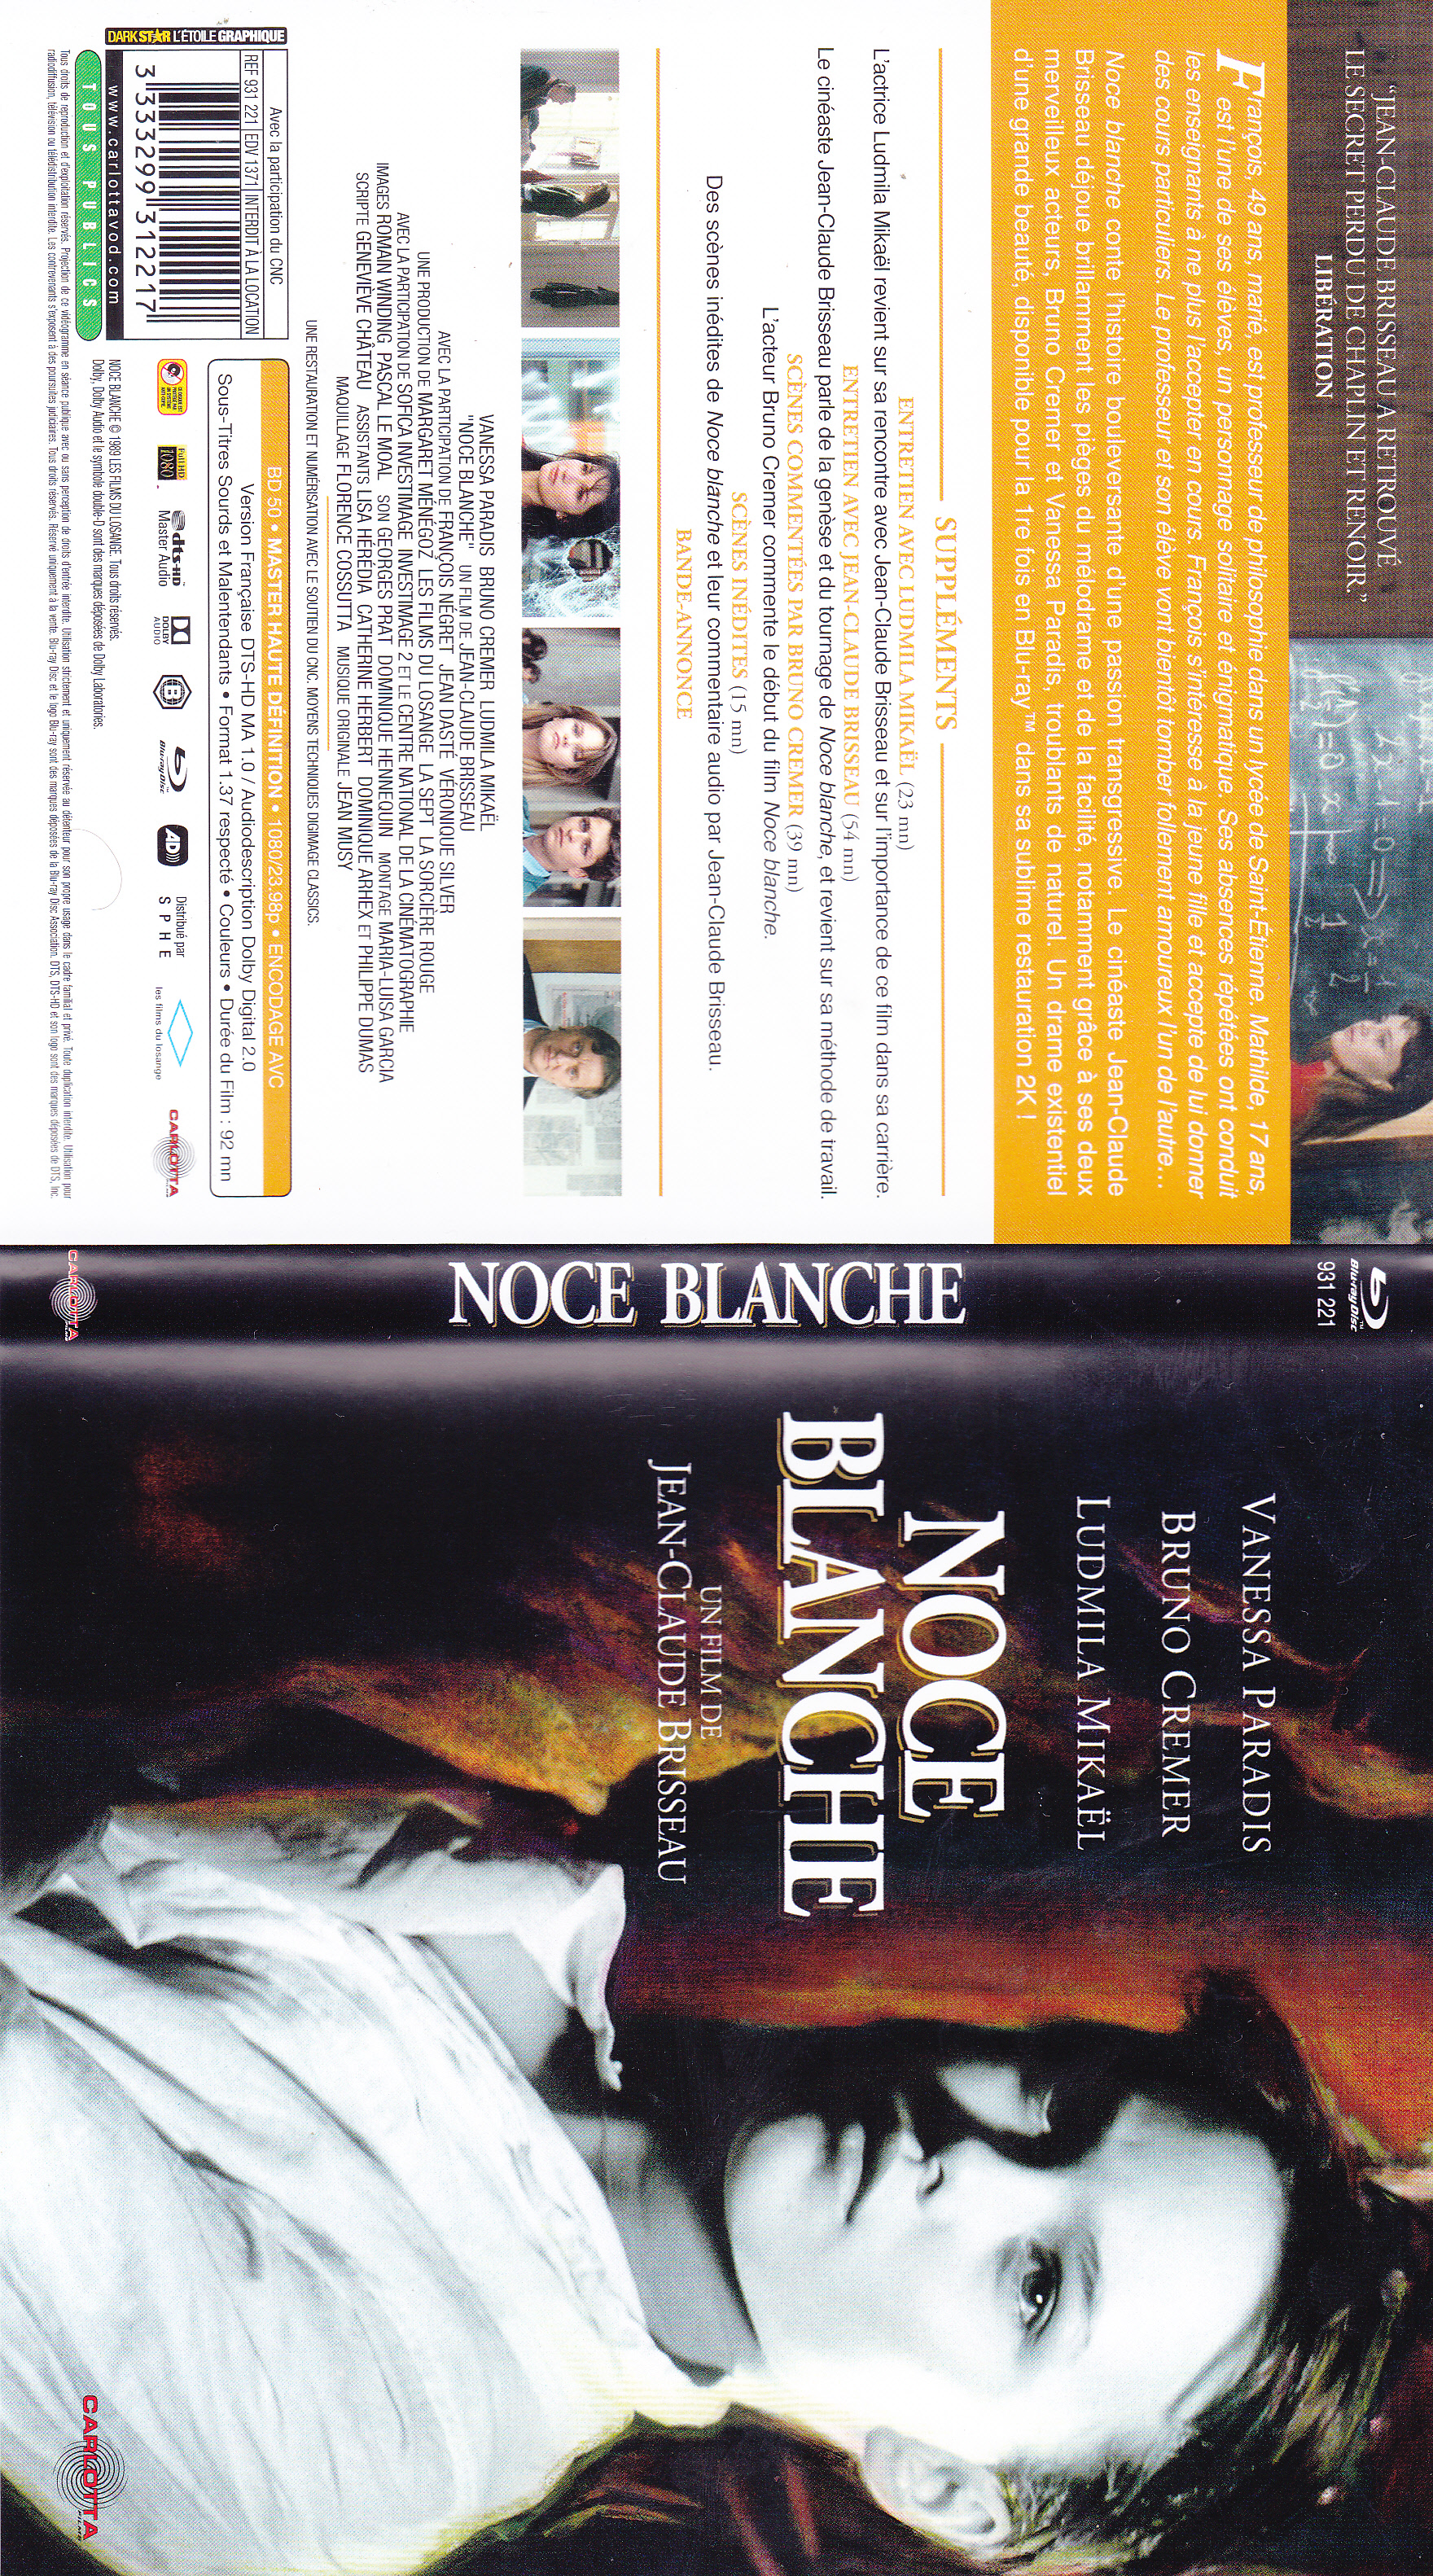 Jaquette DVD Noce blanche (BLU-RAY)